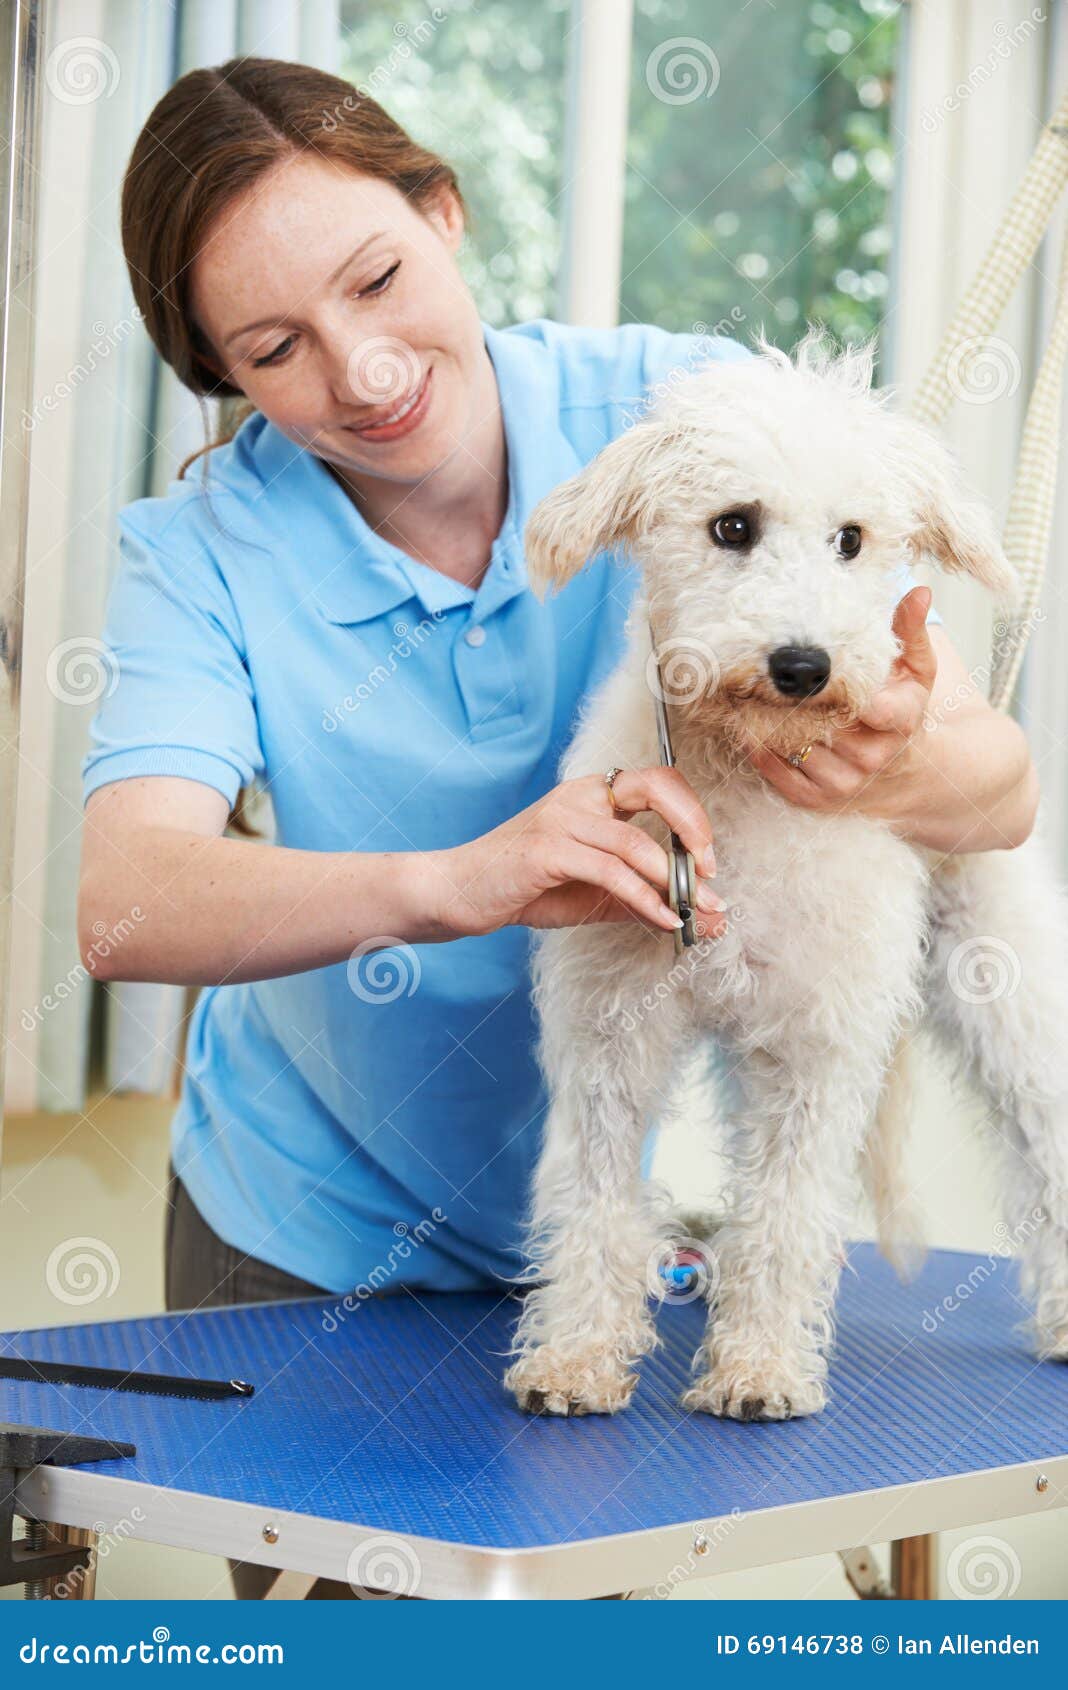 pet dog being professionally groomed in salon